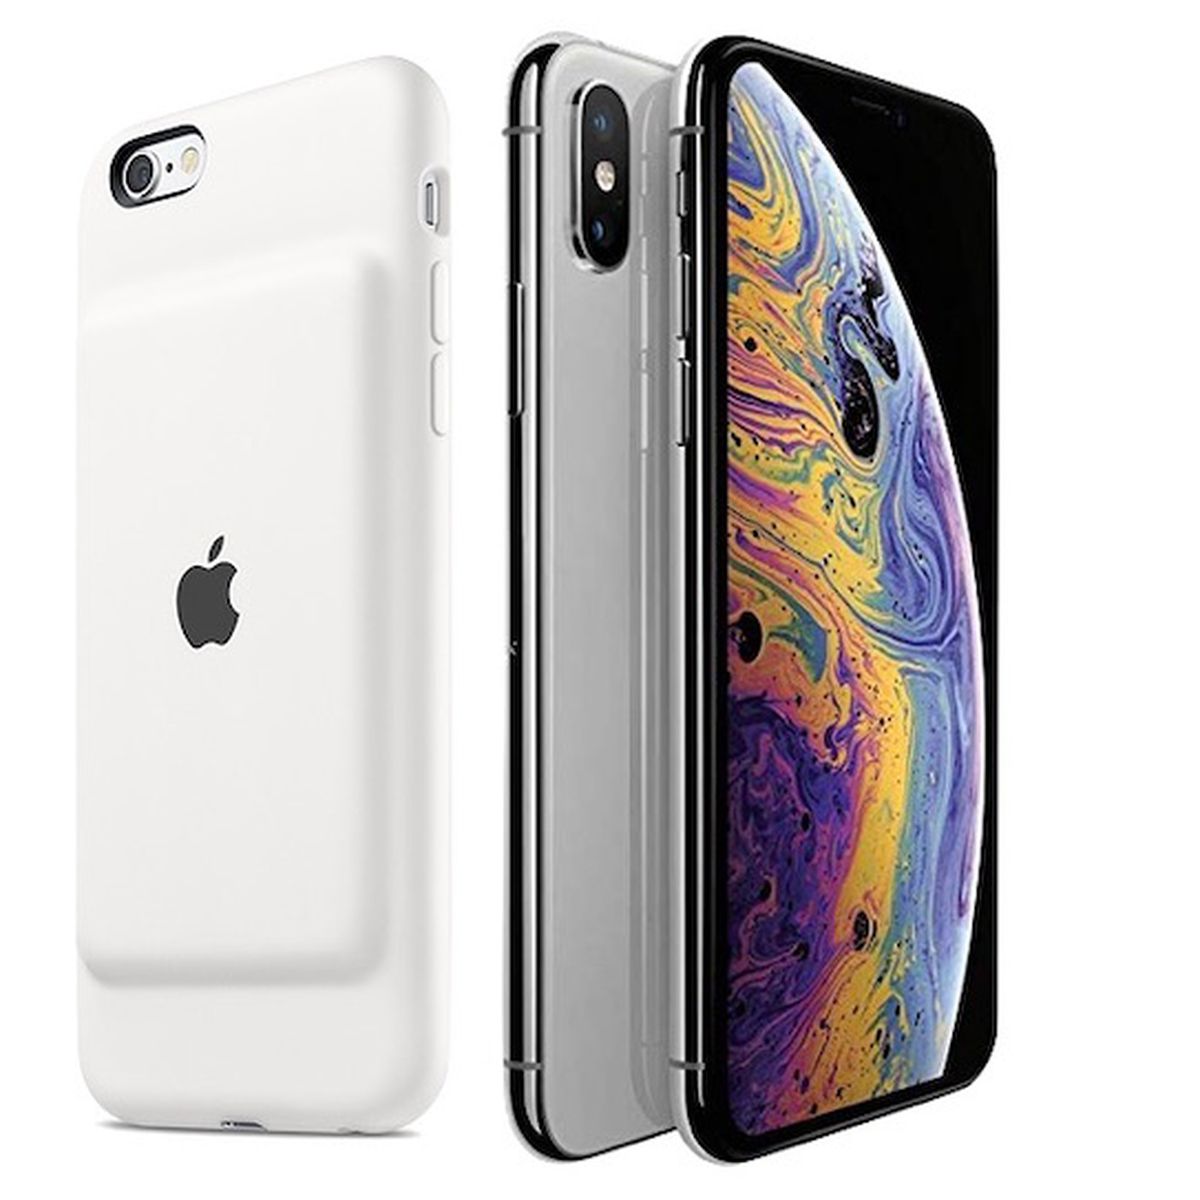 Apple Potentially Working on Smart Battery Case for Latest iPhones 